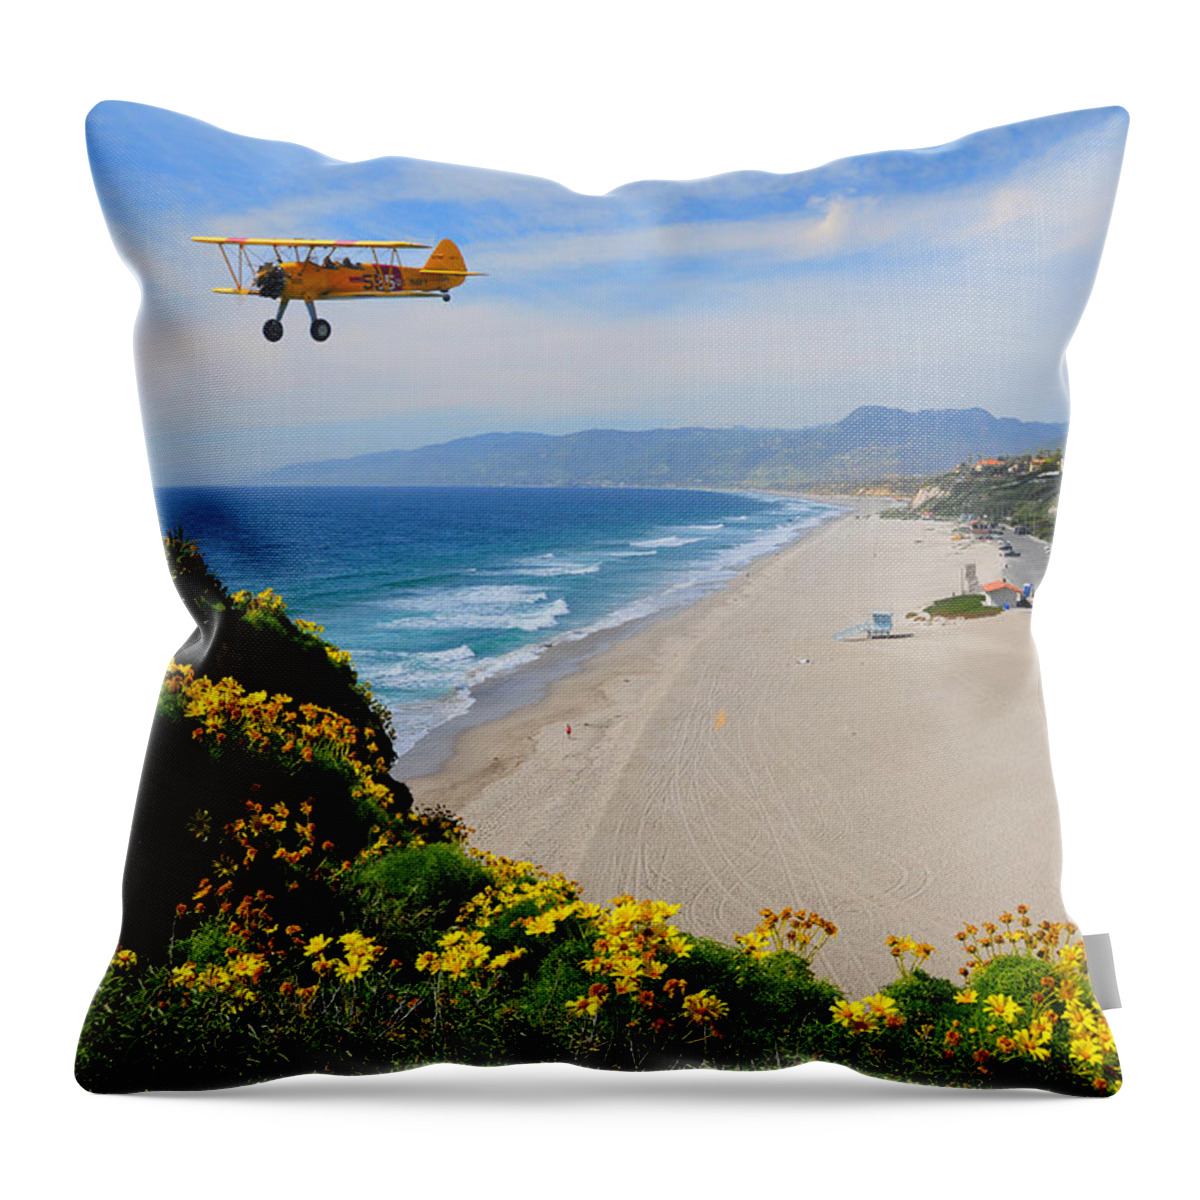 Pt Dume Throw Pillow featuring the photograph Pt Dume Biplane by Lynn Bauer